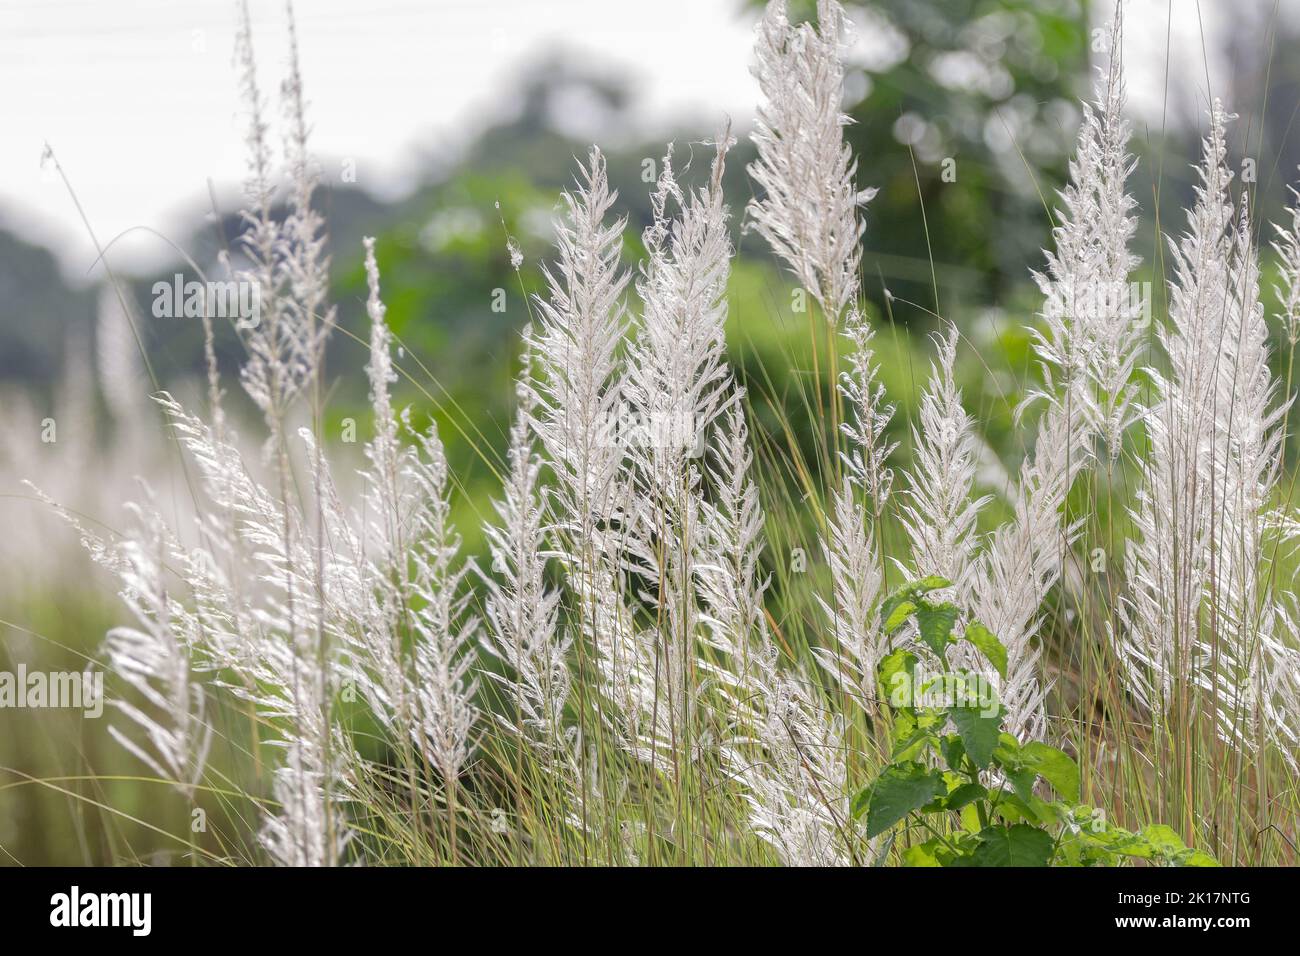 Saccharum spontaneum (wild sugarcane, Kans grass) is a grass native to the Indian Subcontinent. Stock Photo